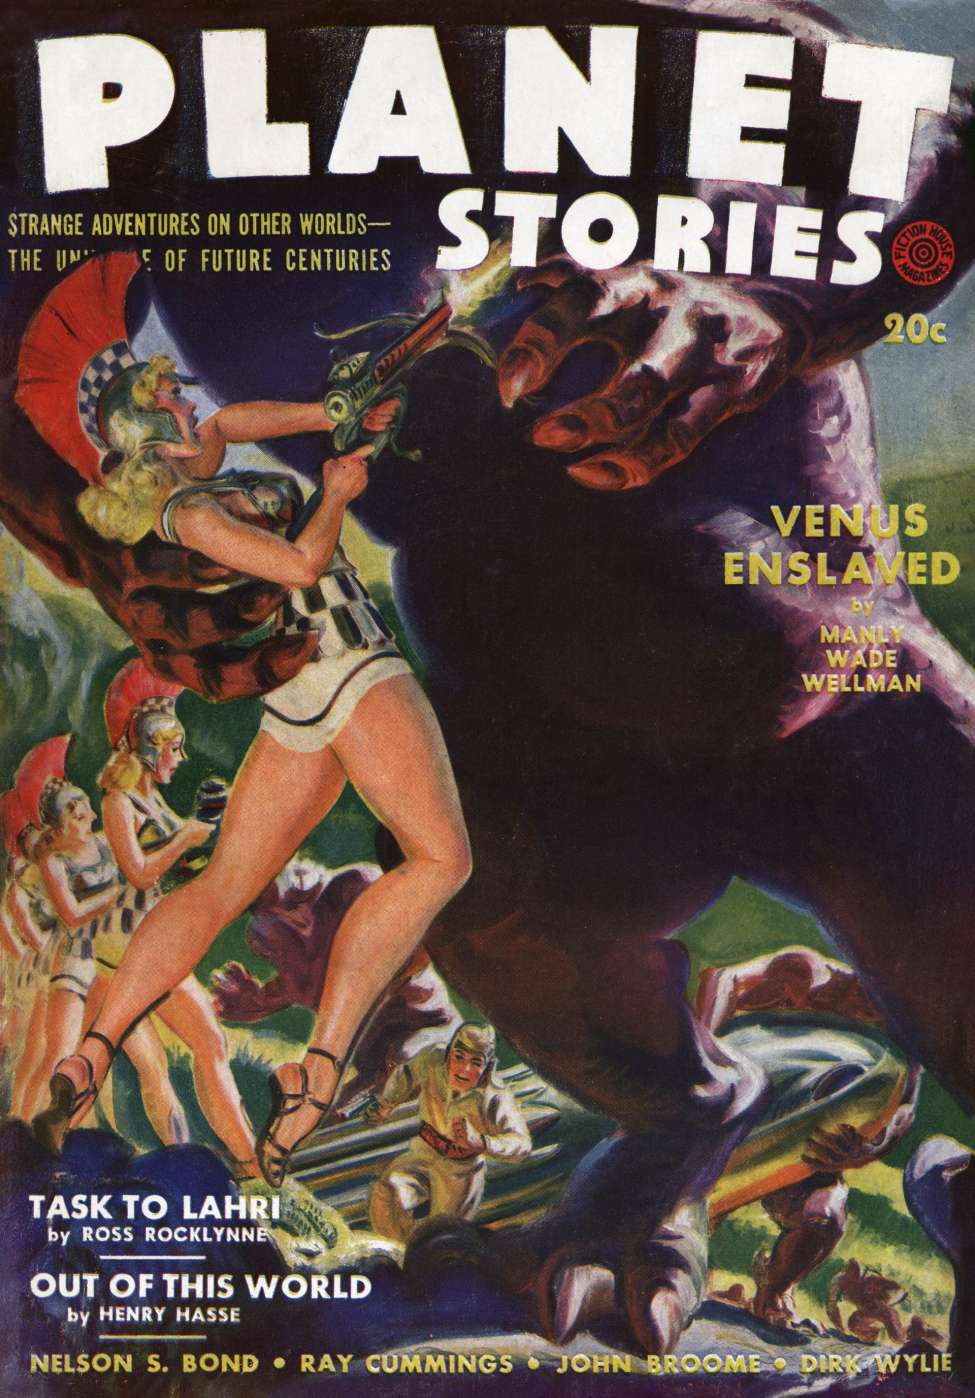 Book Cover For Planet Stories v1 11 - Venus Enslaved - Manly Wade Wellman